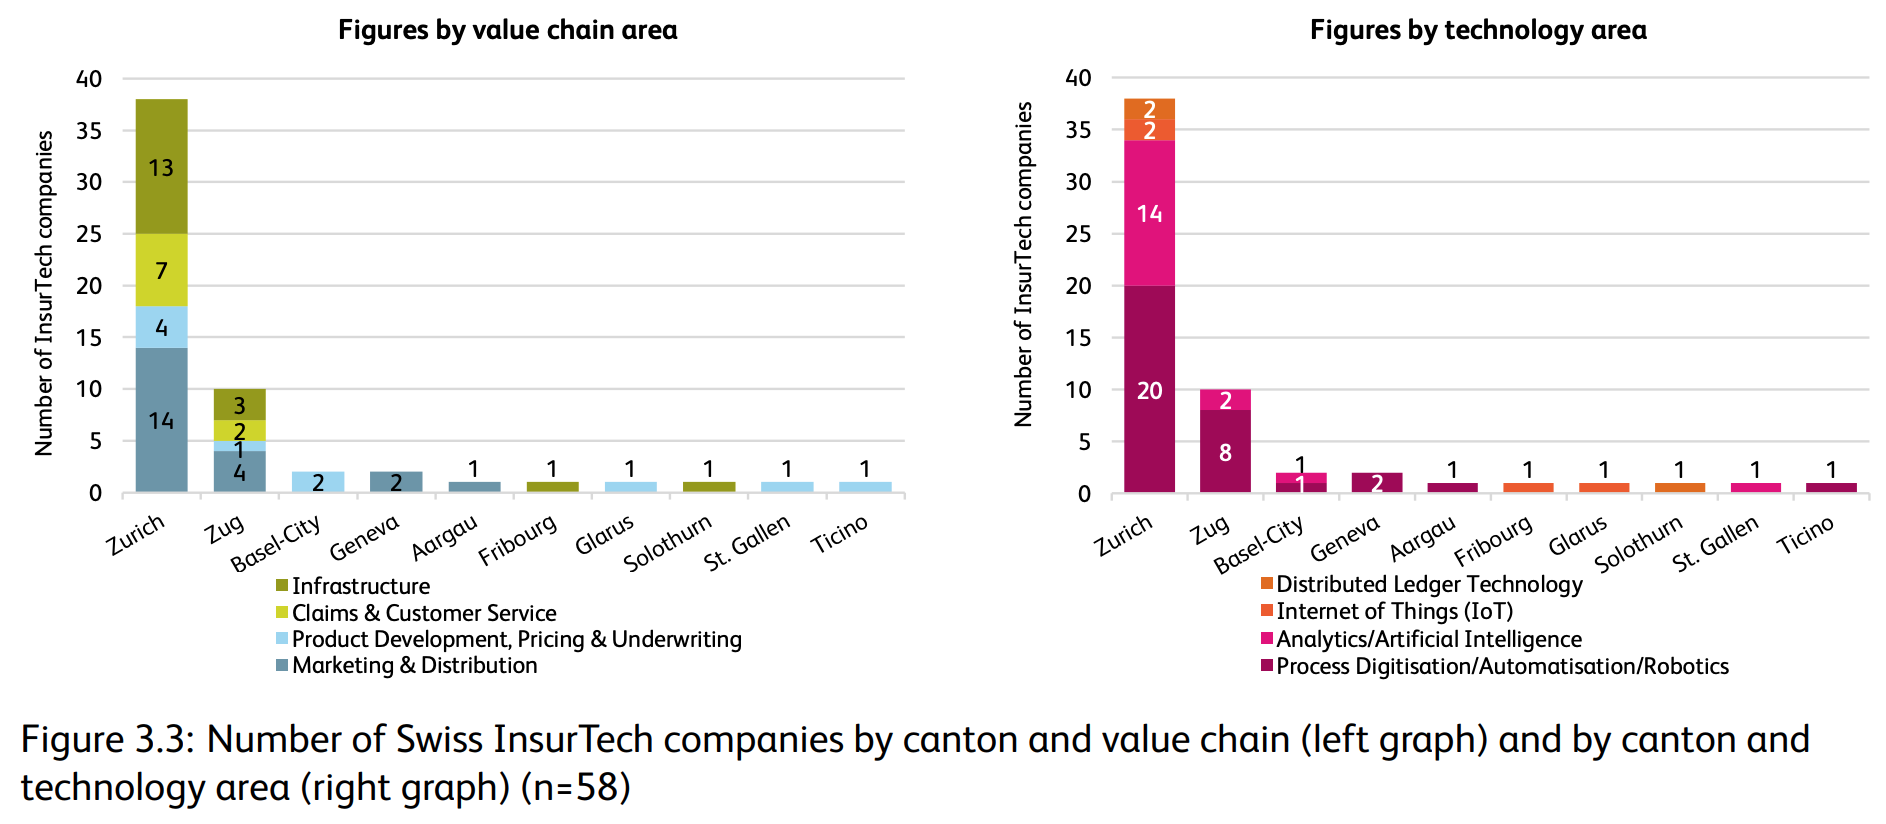 Number of Swiss insurtech companies by canton and value chain (left graph) and by canton and technology area (right graph), Source: IFZ Insurtech Report 2022